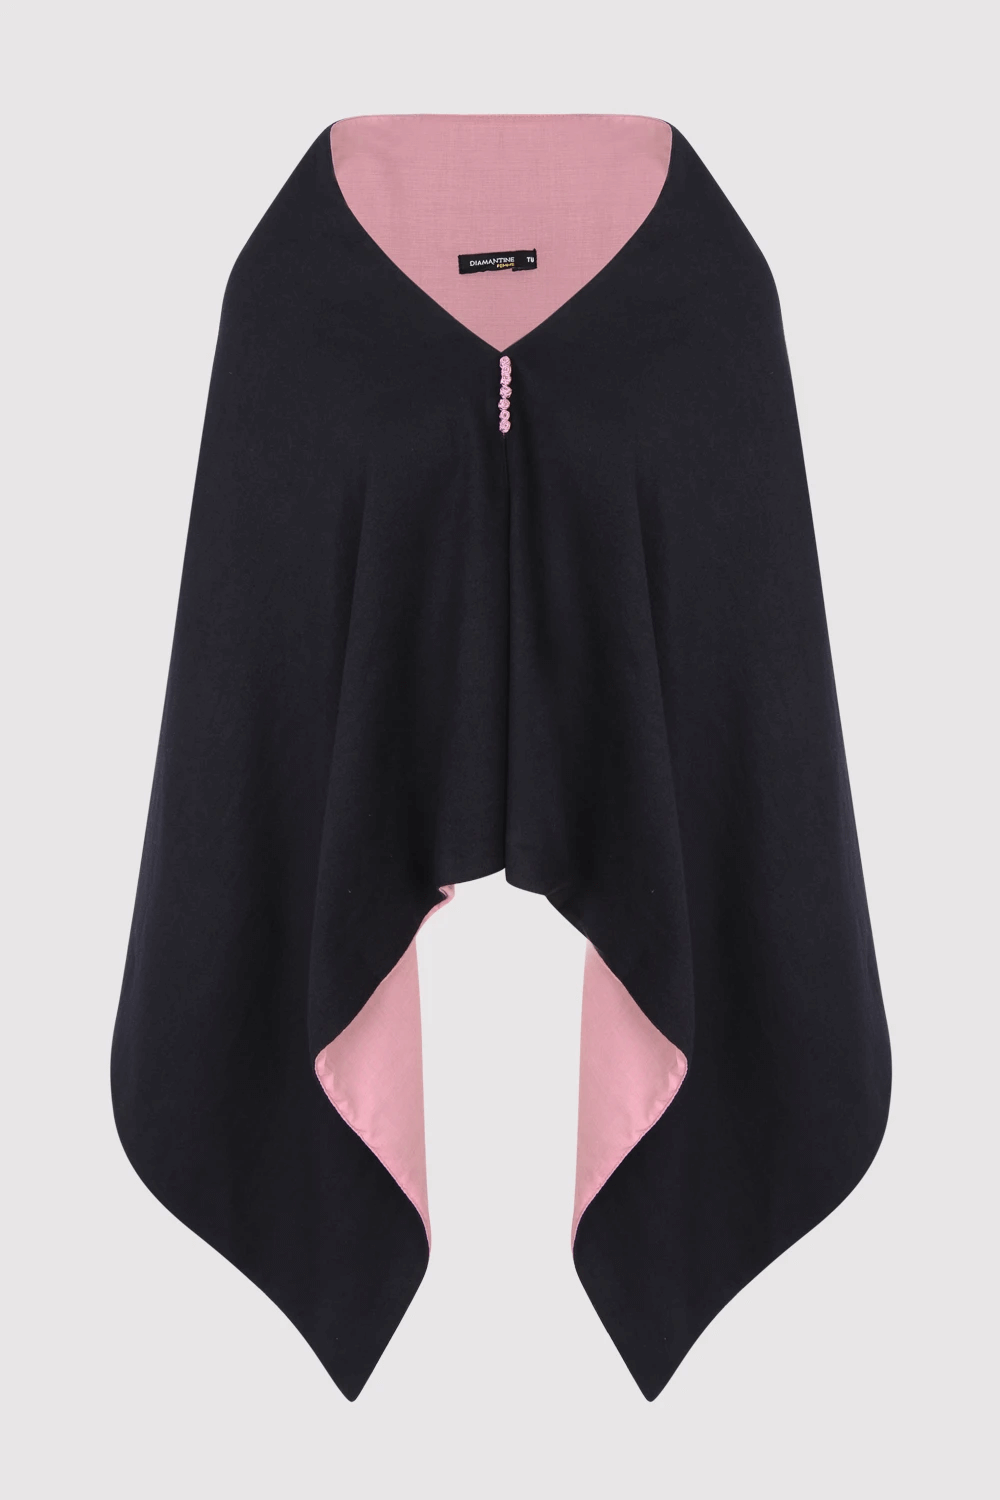 Cape Lilya in Two-Tone Black and Mauve